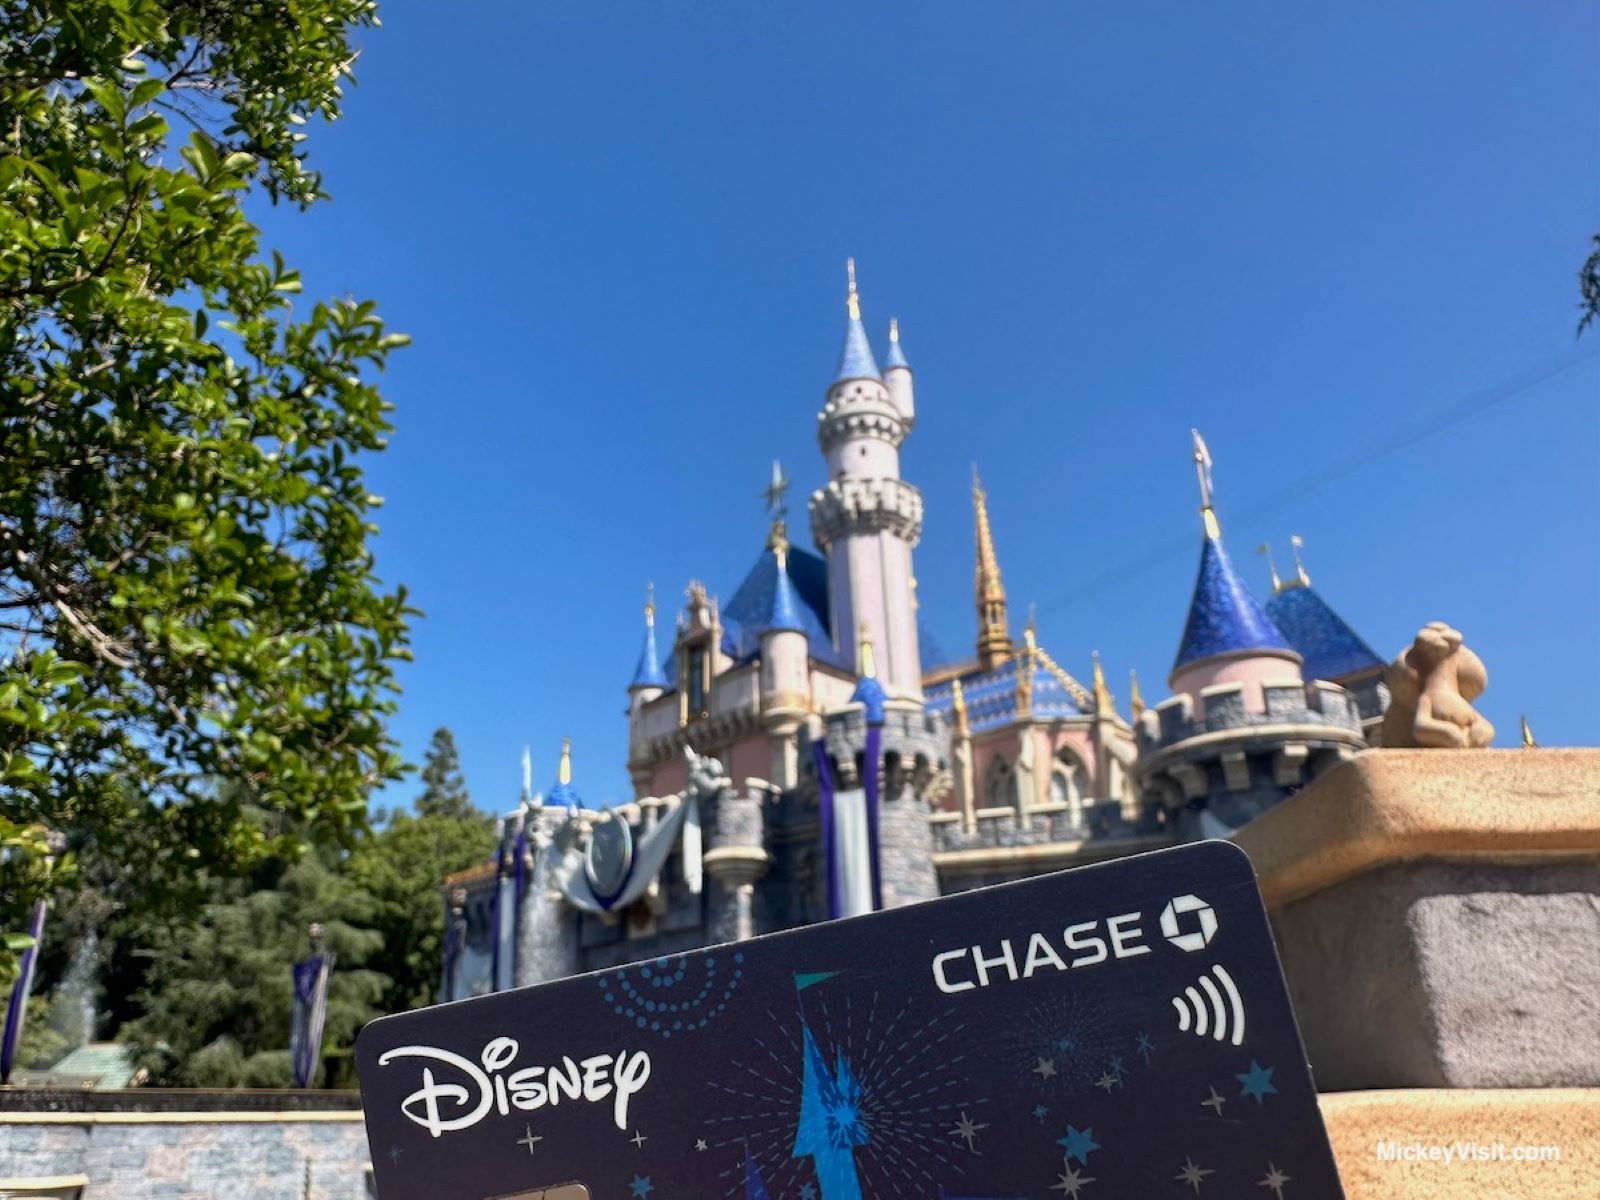 How To Add Credit Card To Disney App